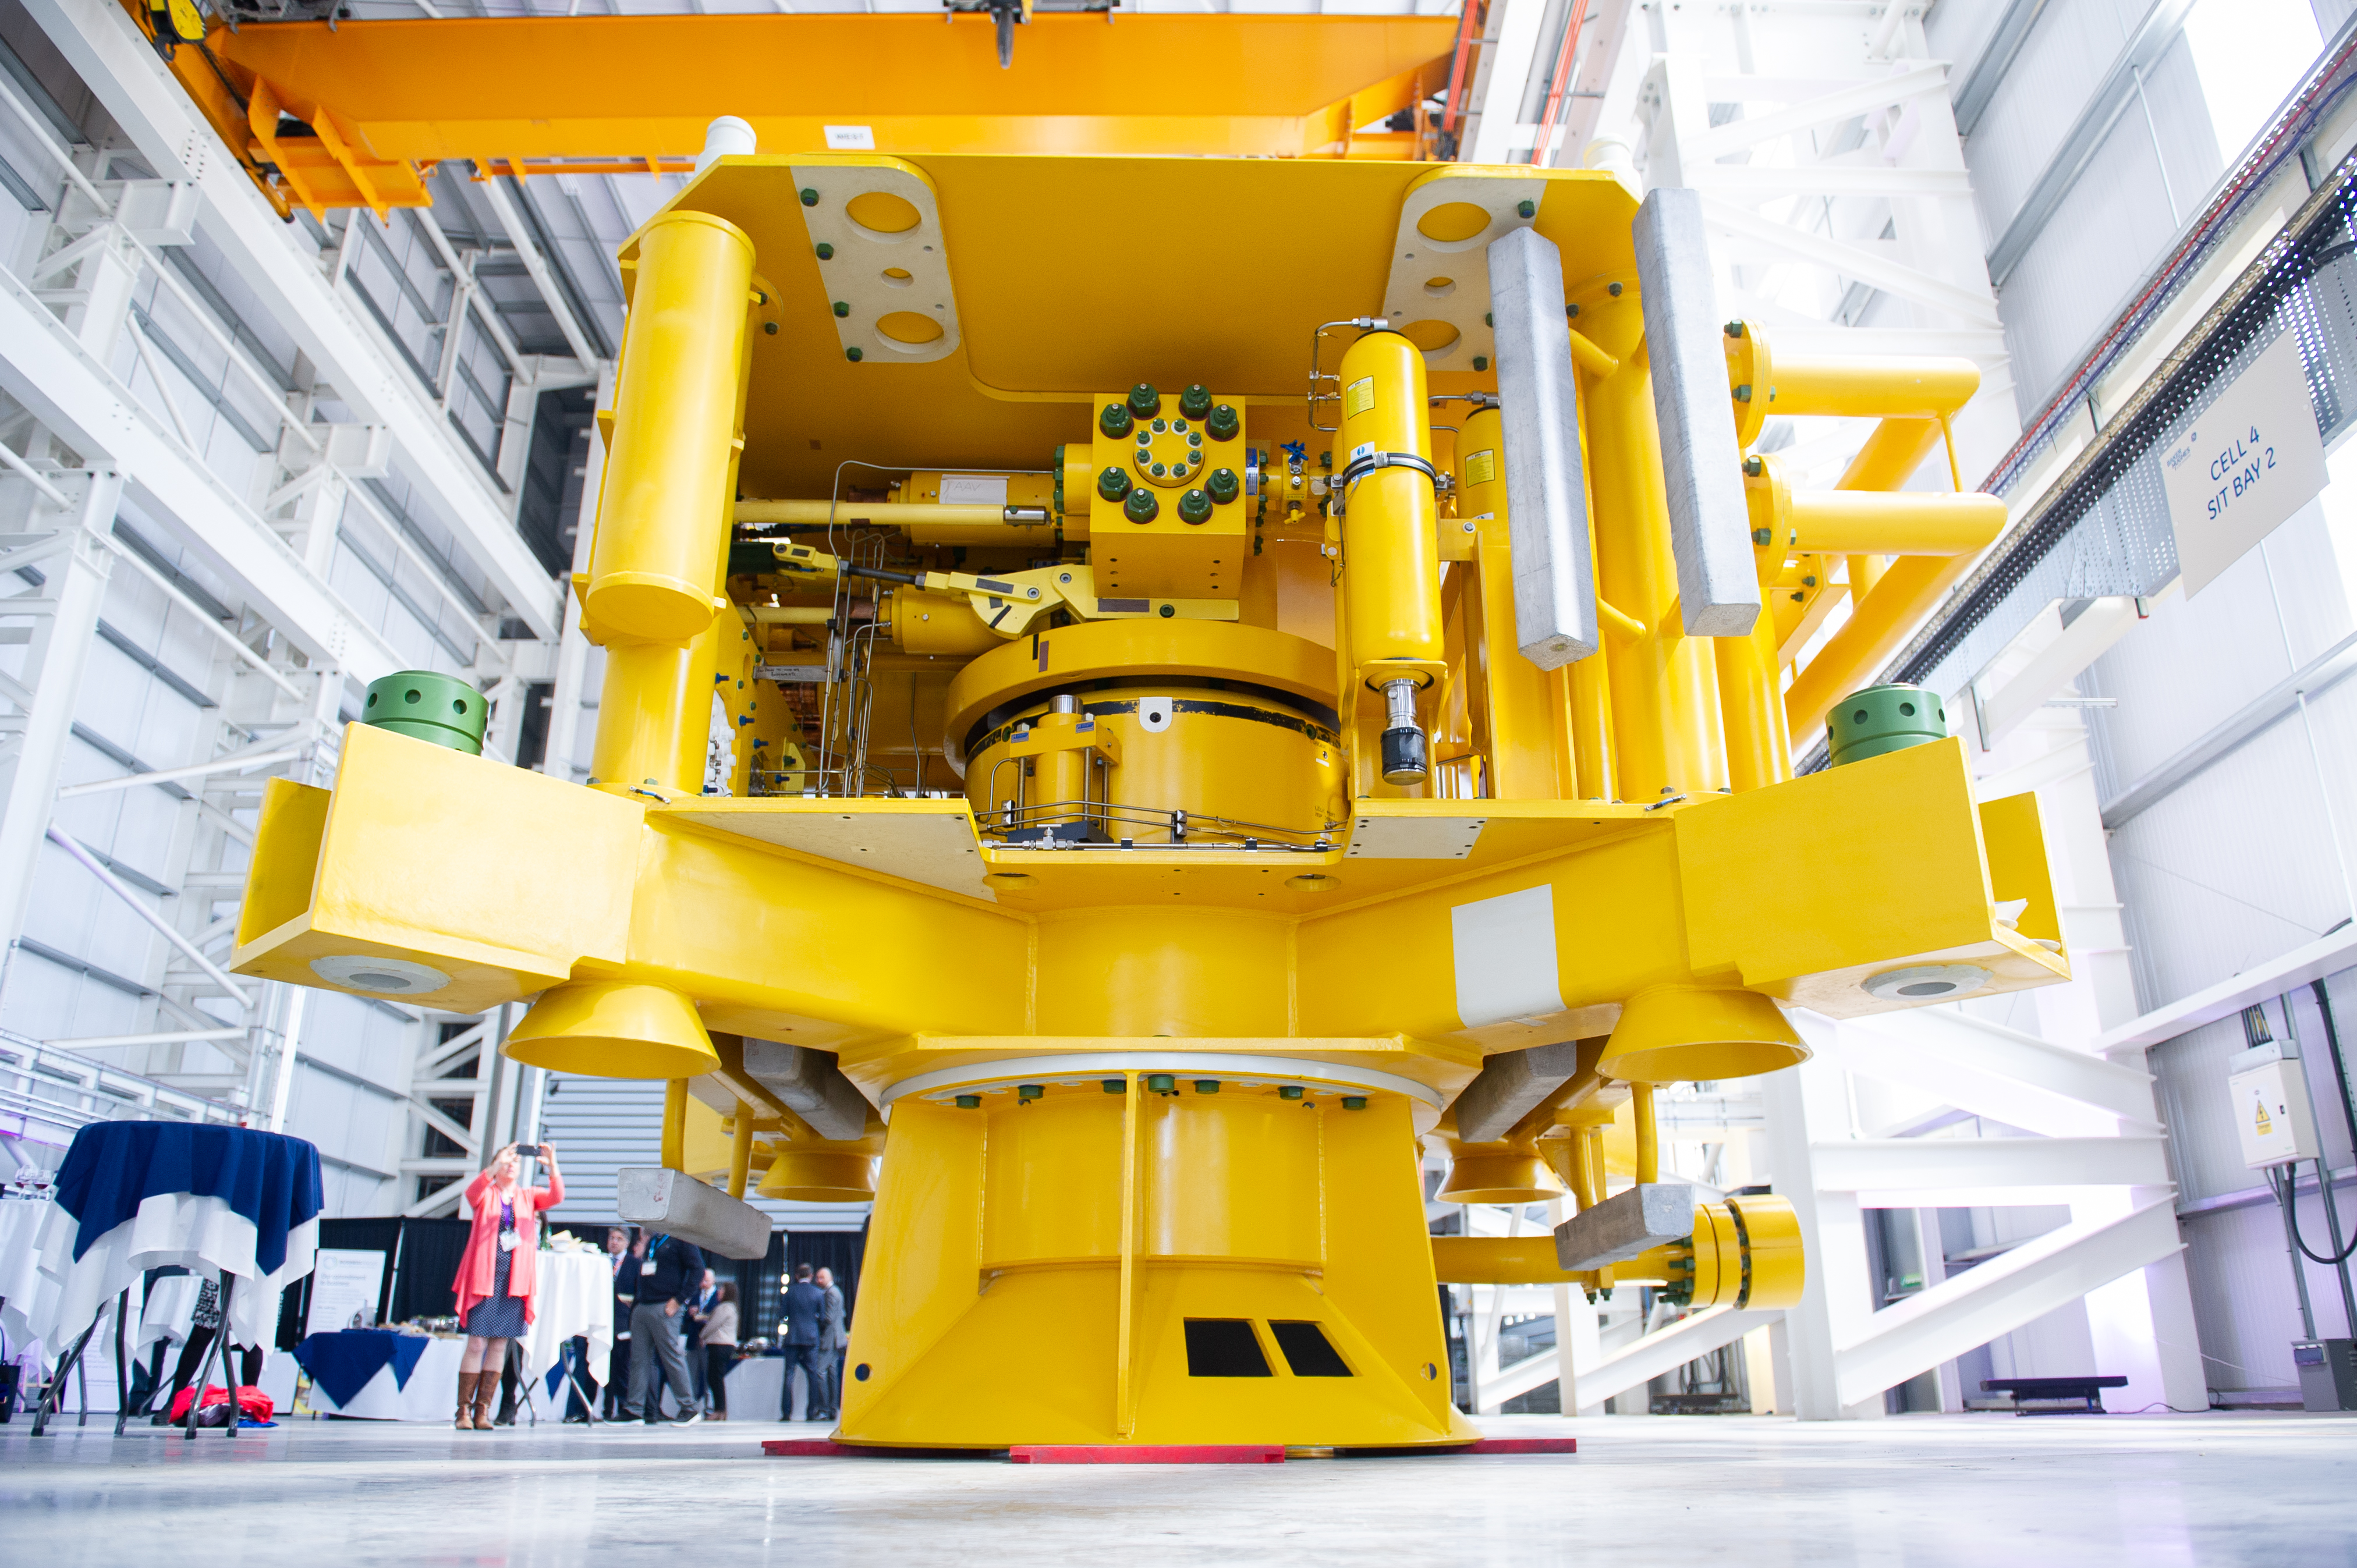 Subsea equipment manufactured and tested at the Baker Hughes Montrose facility.